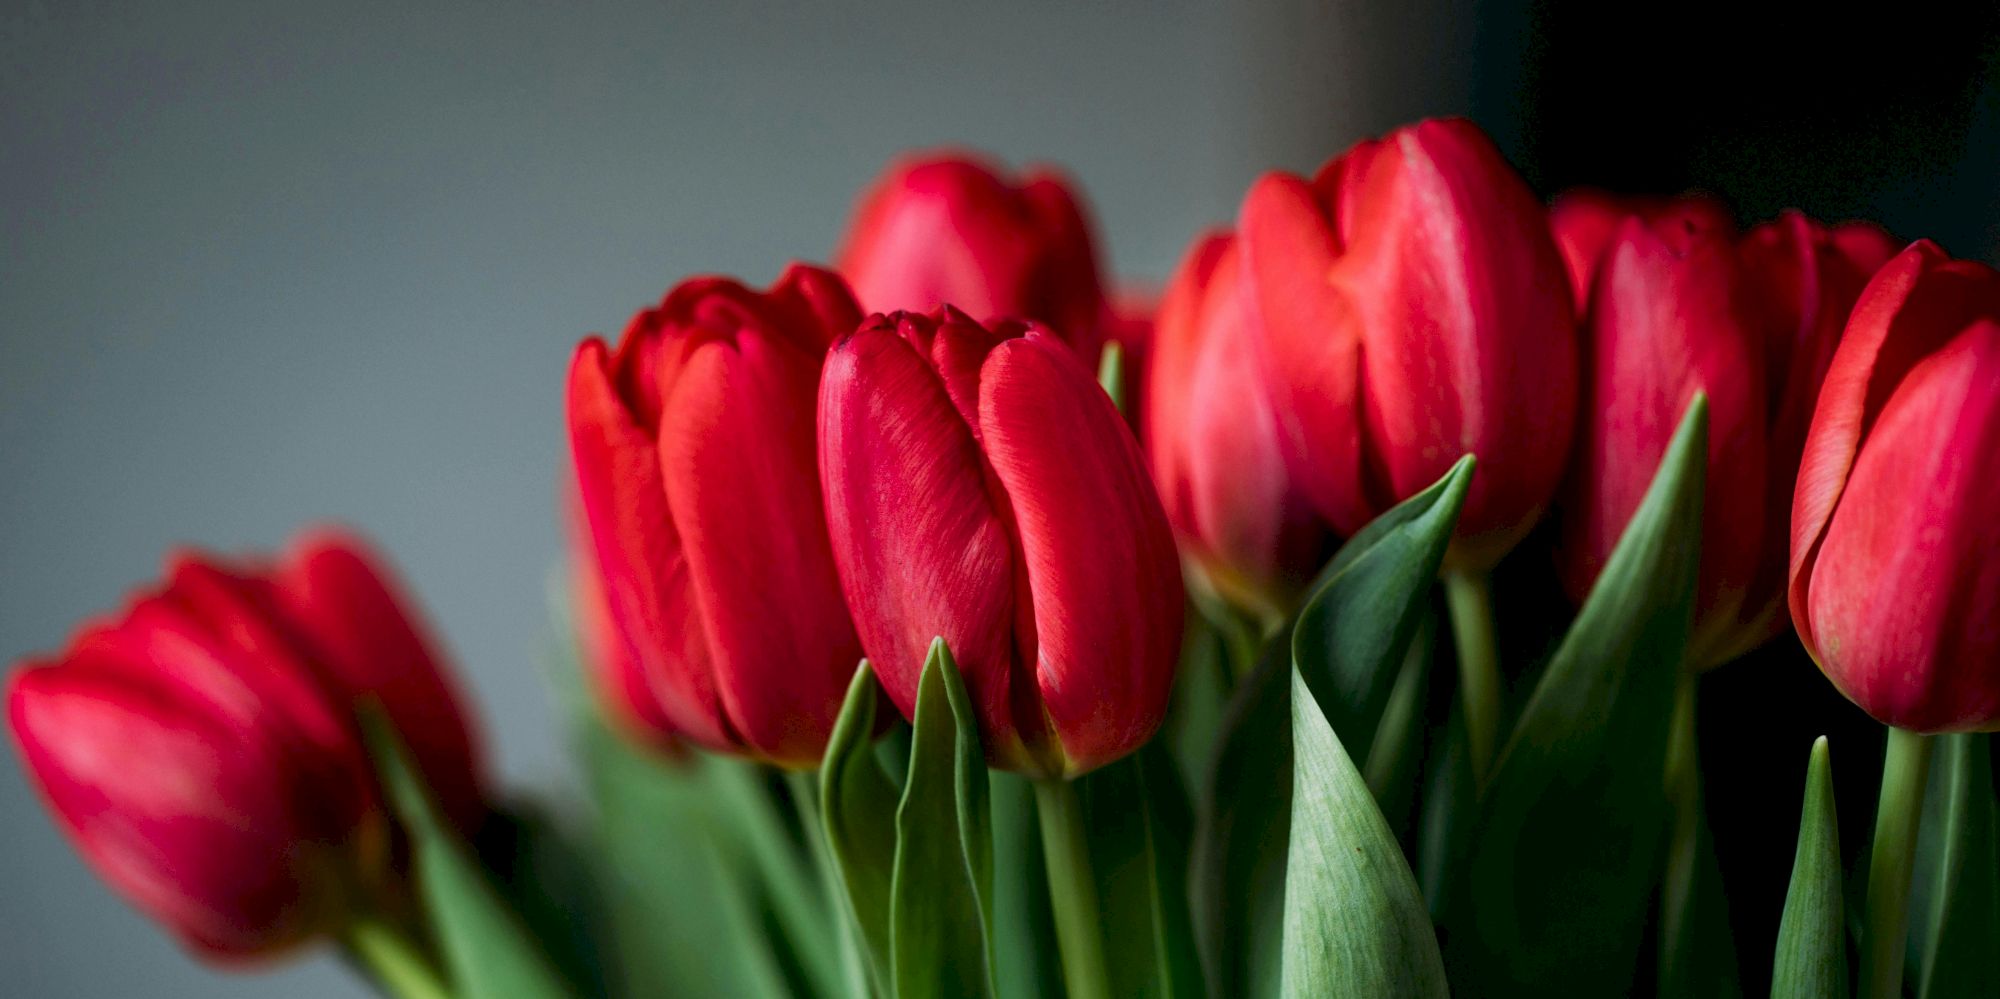 A beautiful bouquet of red tulips with green stems.